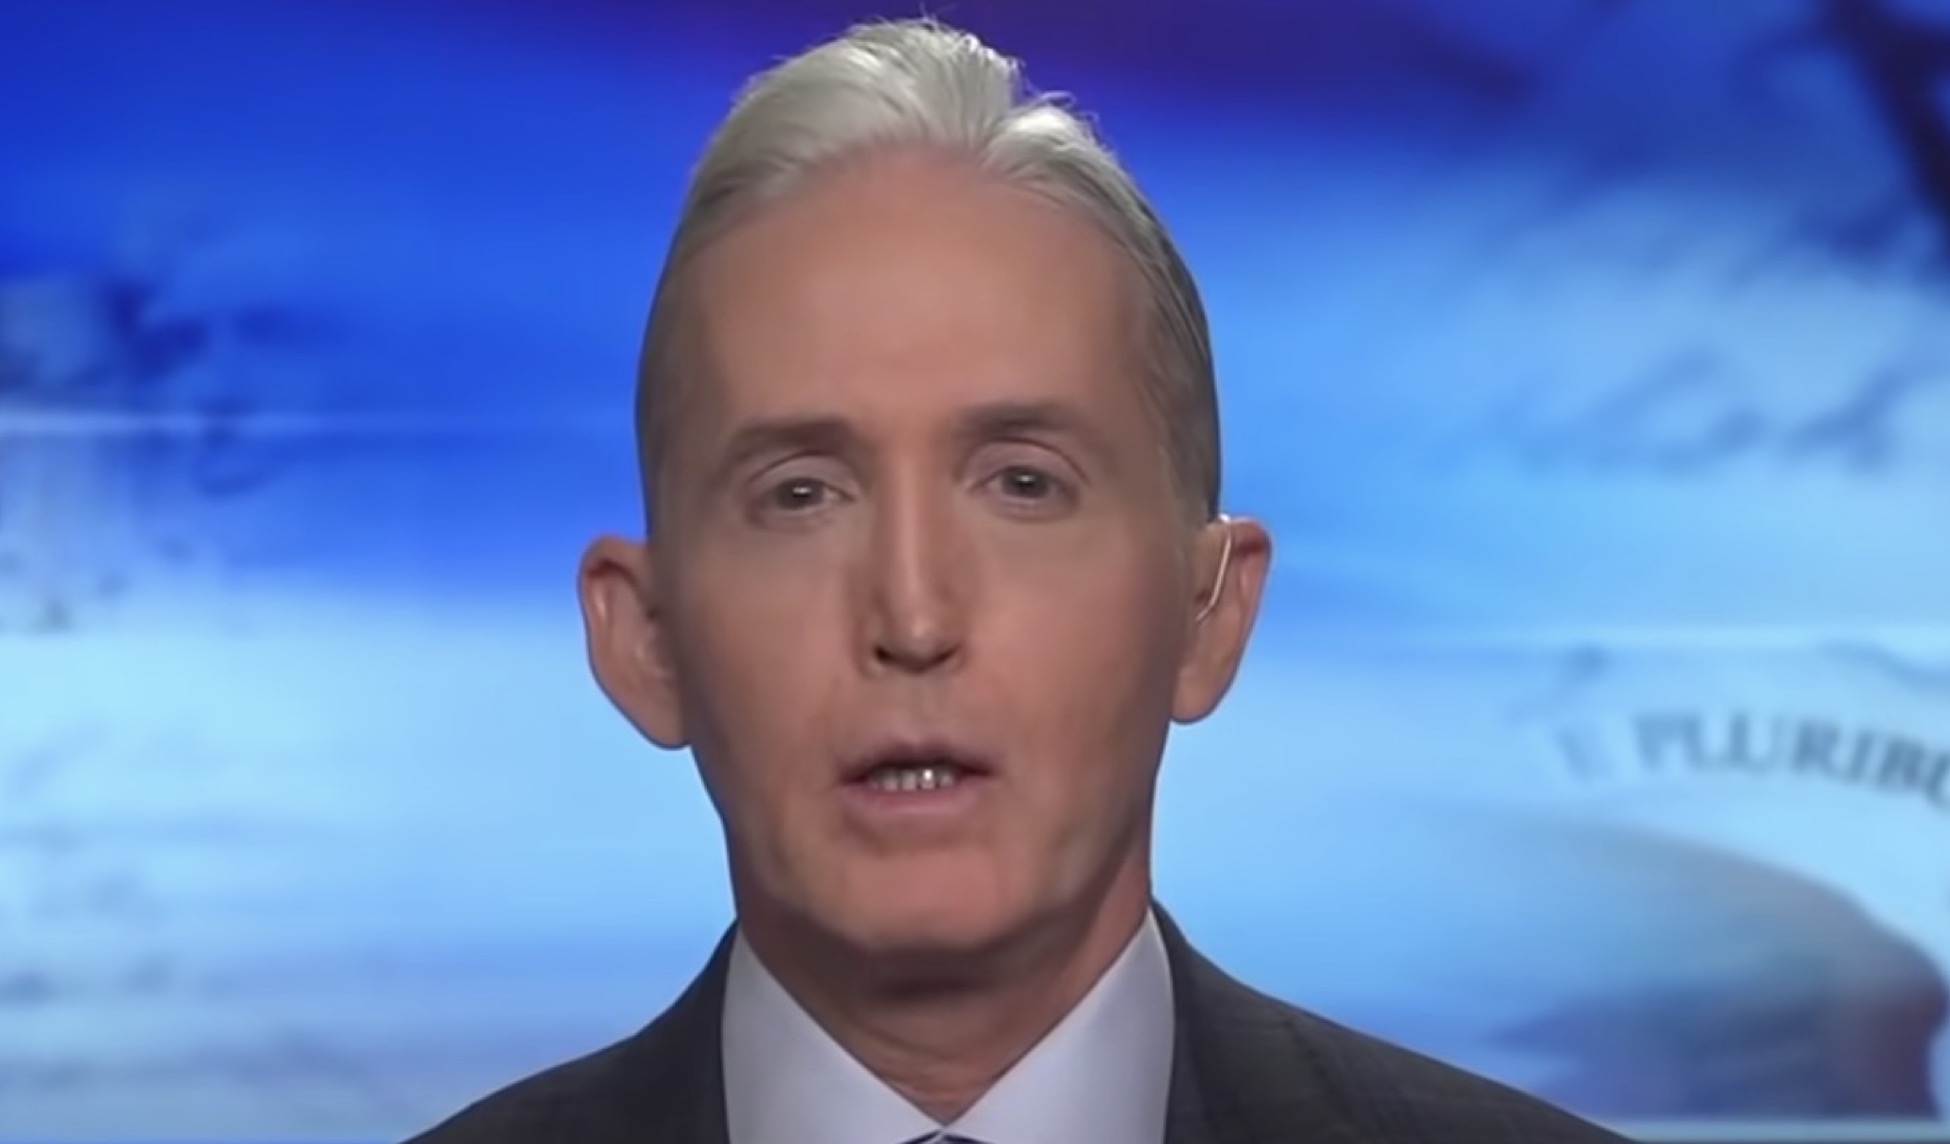 Trey Gowdy Calls for CrossExamination of Witnesses in Jan. 6 Hearings